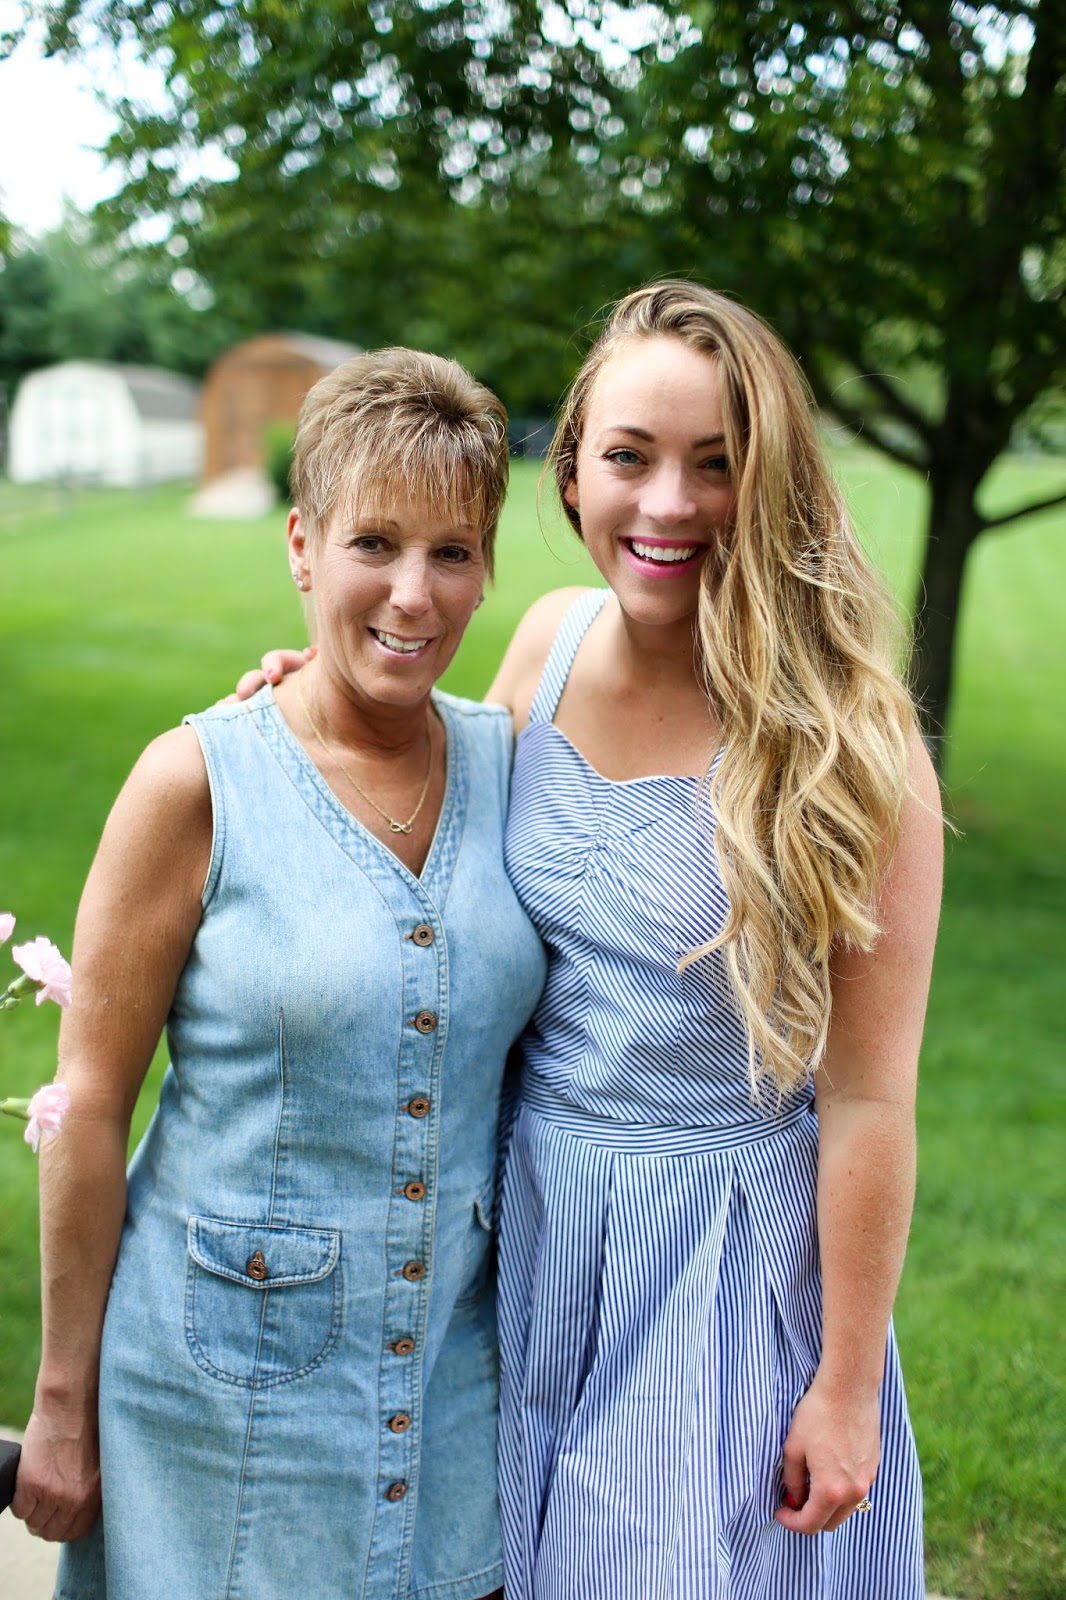 10 Things the Strongest Woman I Know Has Taught Me